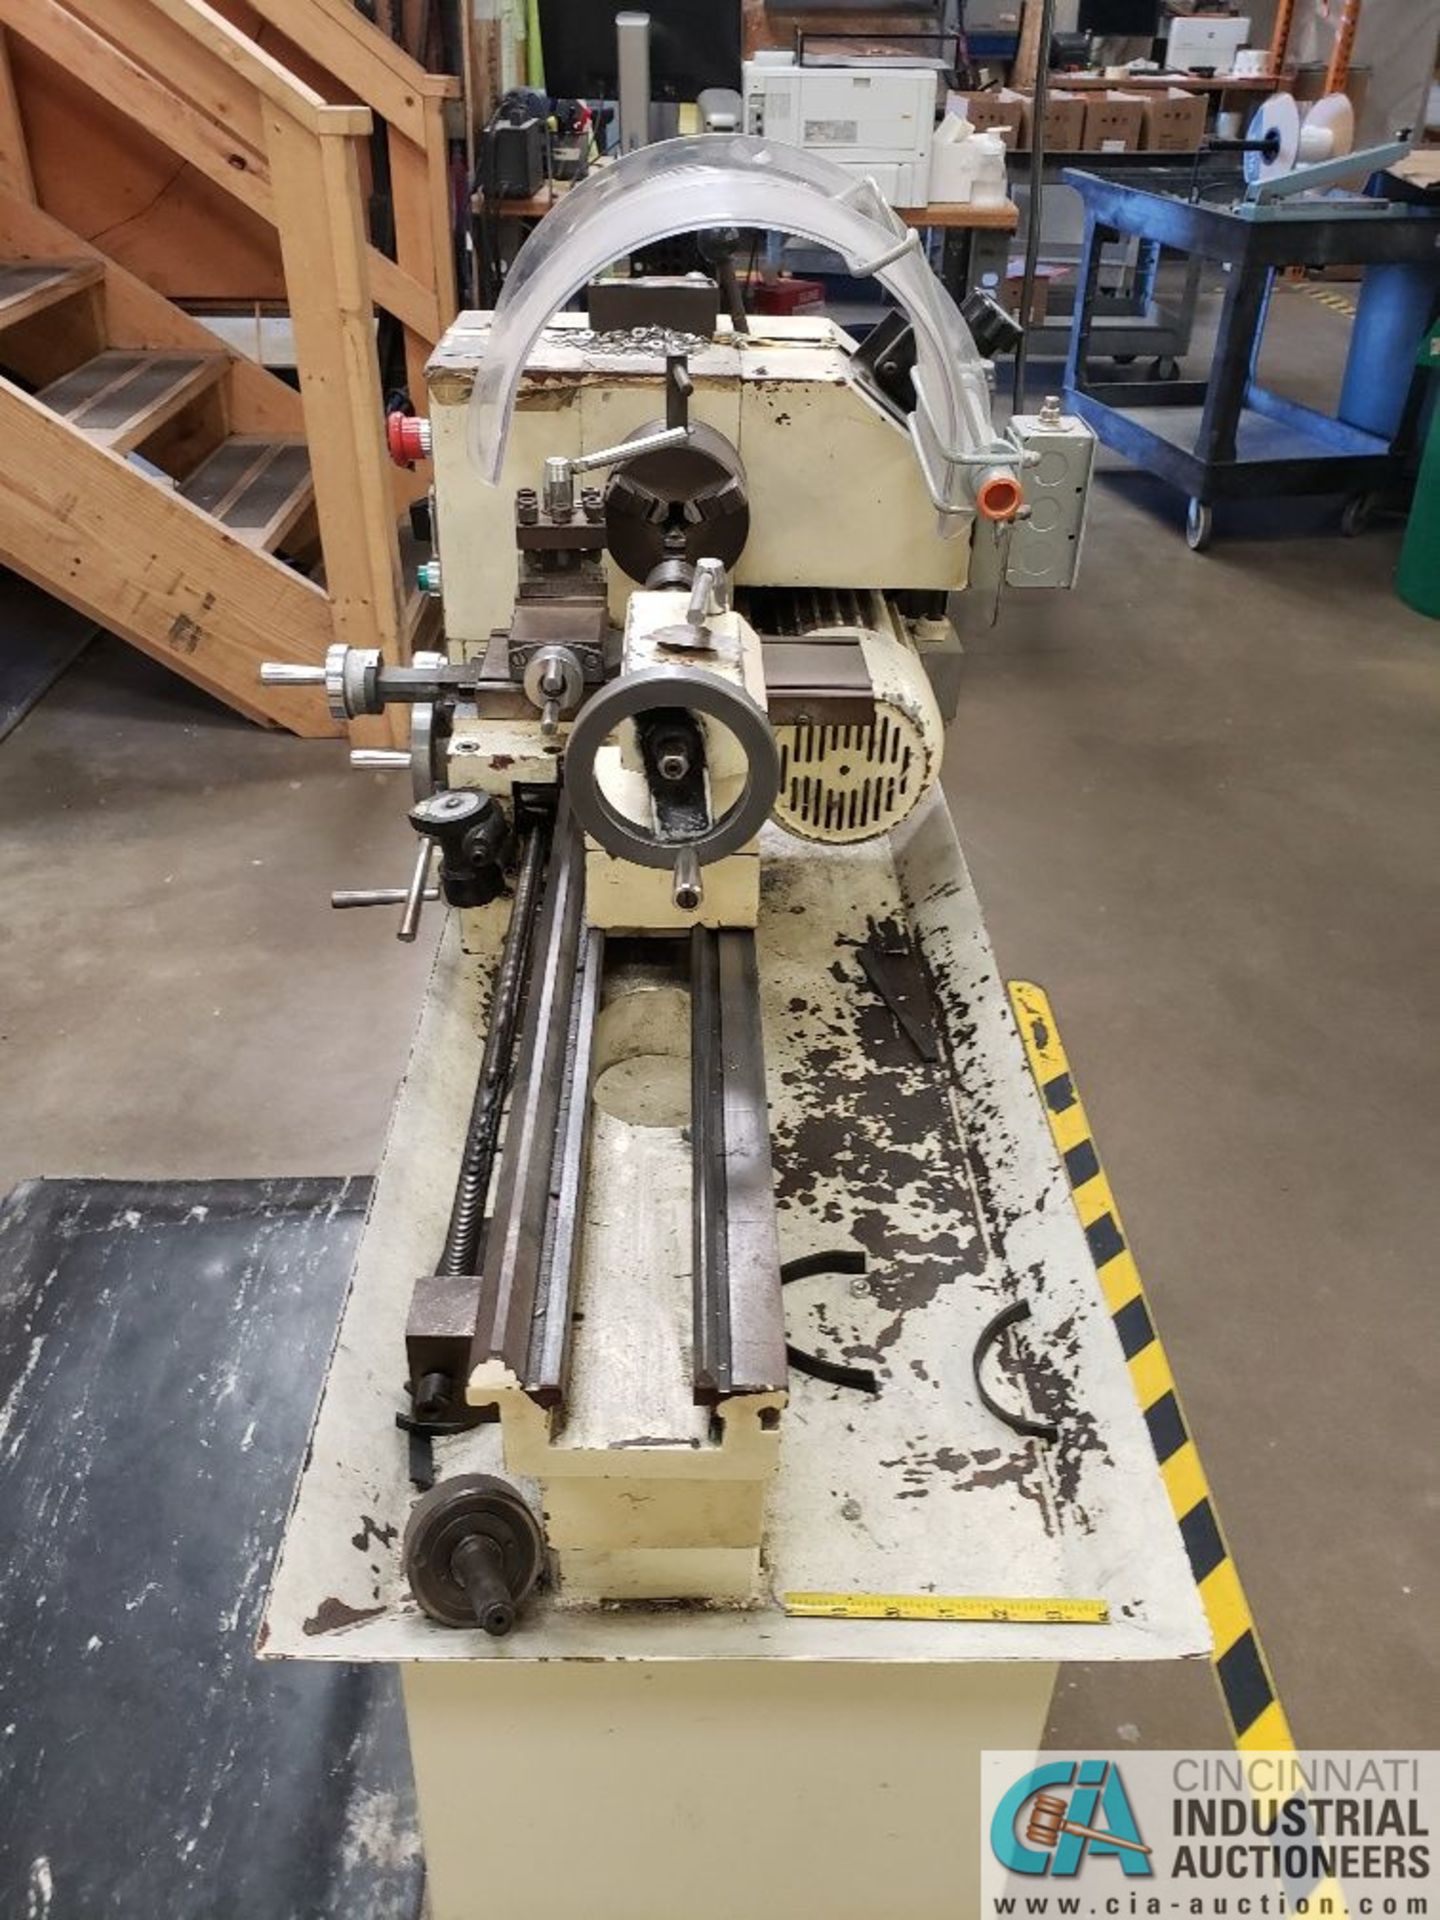 JET MODEL BD-920W LATHE WITH STAND, 9" X 20" BEL **Loading Fee Due the "ERRA" DFW Movers, $100.00** - Image 5 of 5